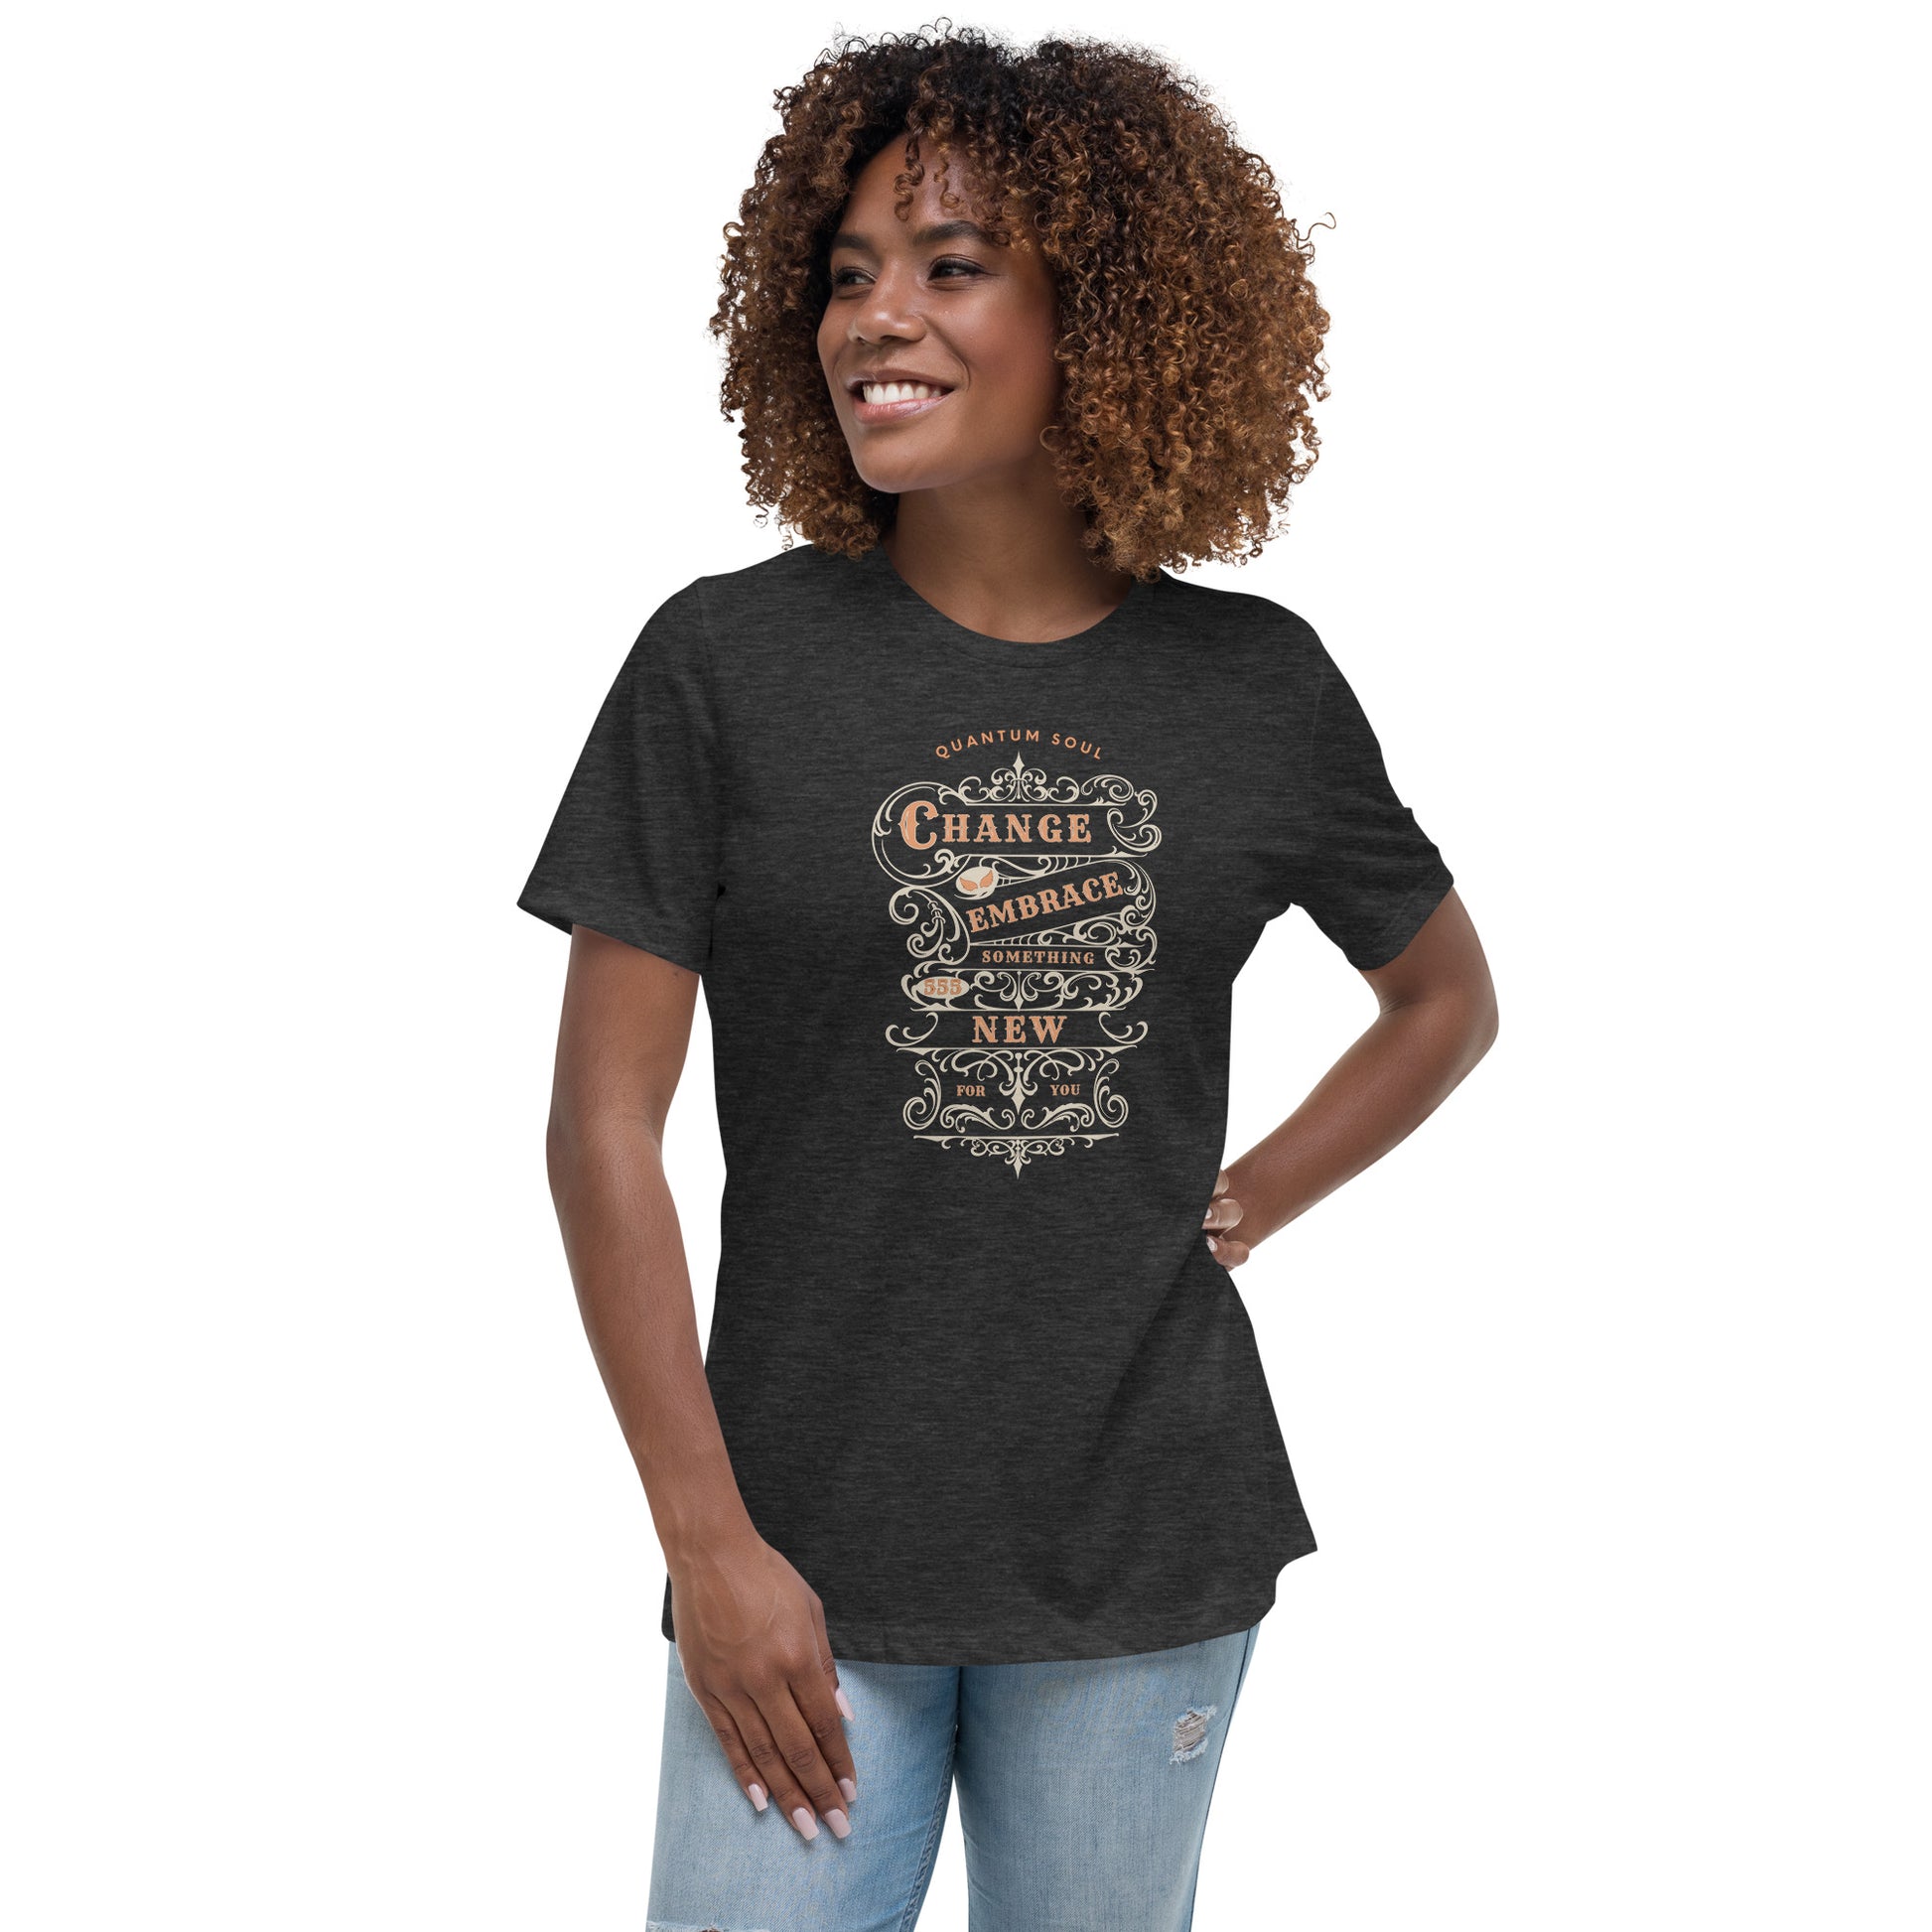 Change 555 womens-relaxed-t-shirt-dark-grey-heather-front